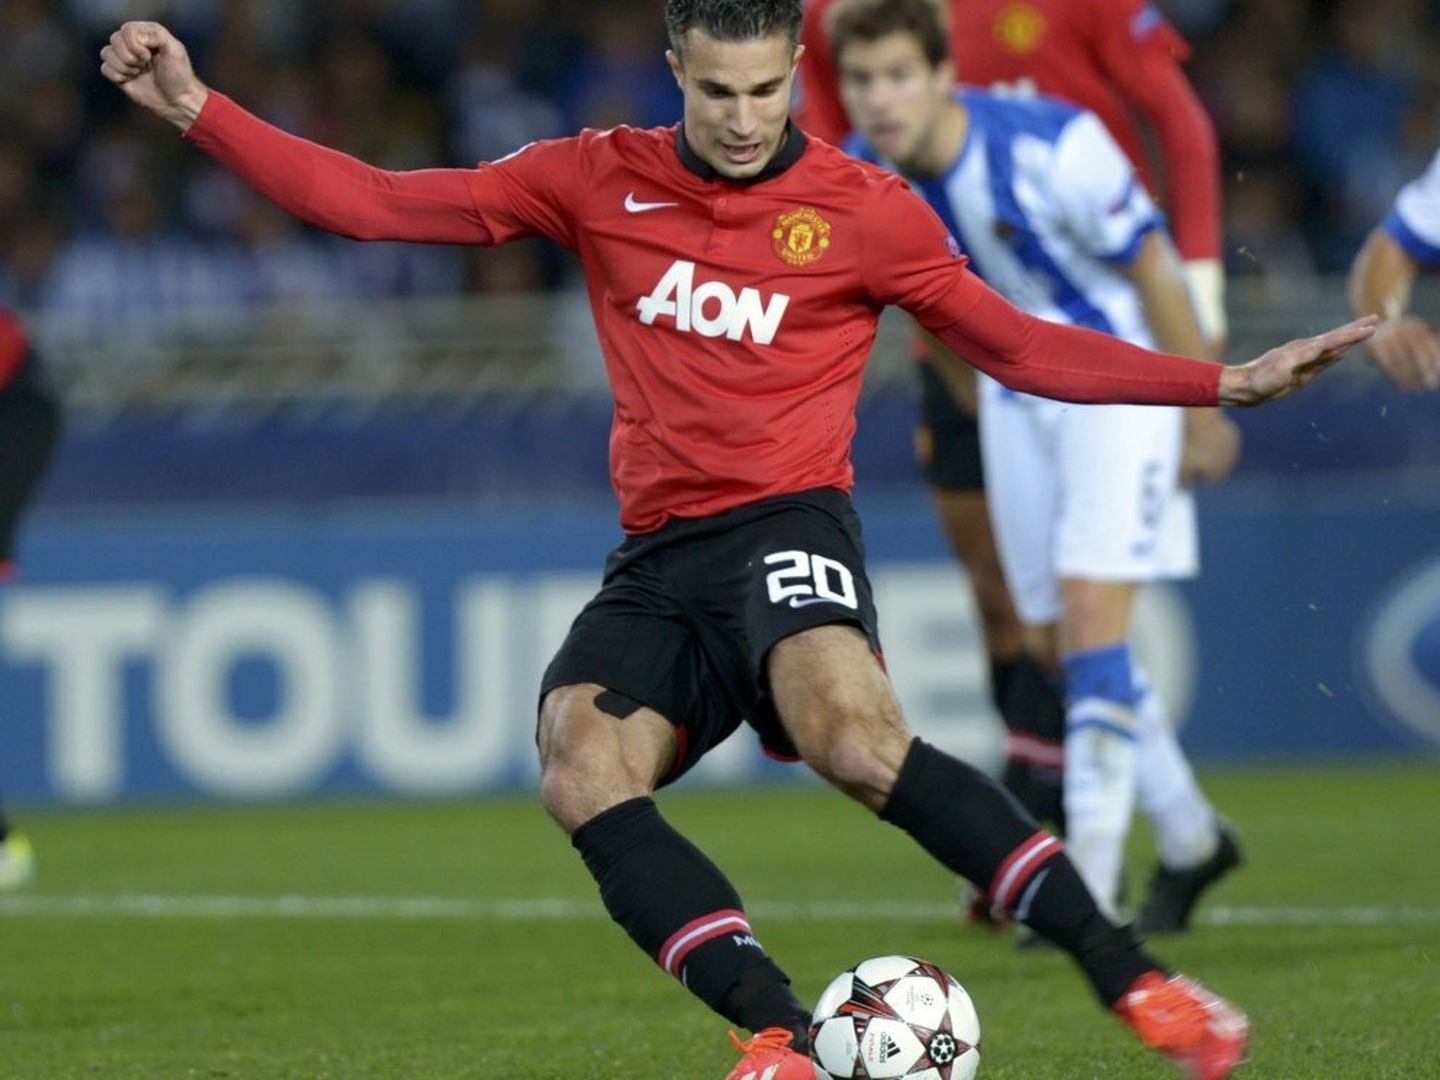 Manchester united's van persie kicks the ball to miss a penalty shot during their champions league soccer match against real sociedad in san sebastian